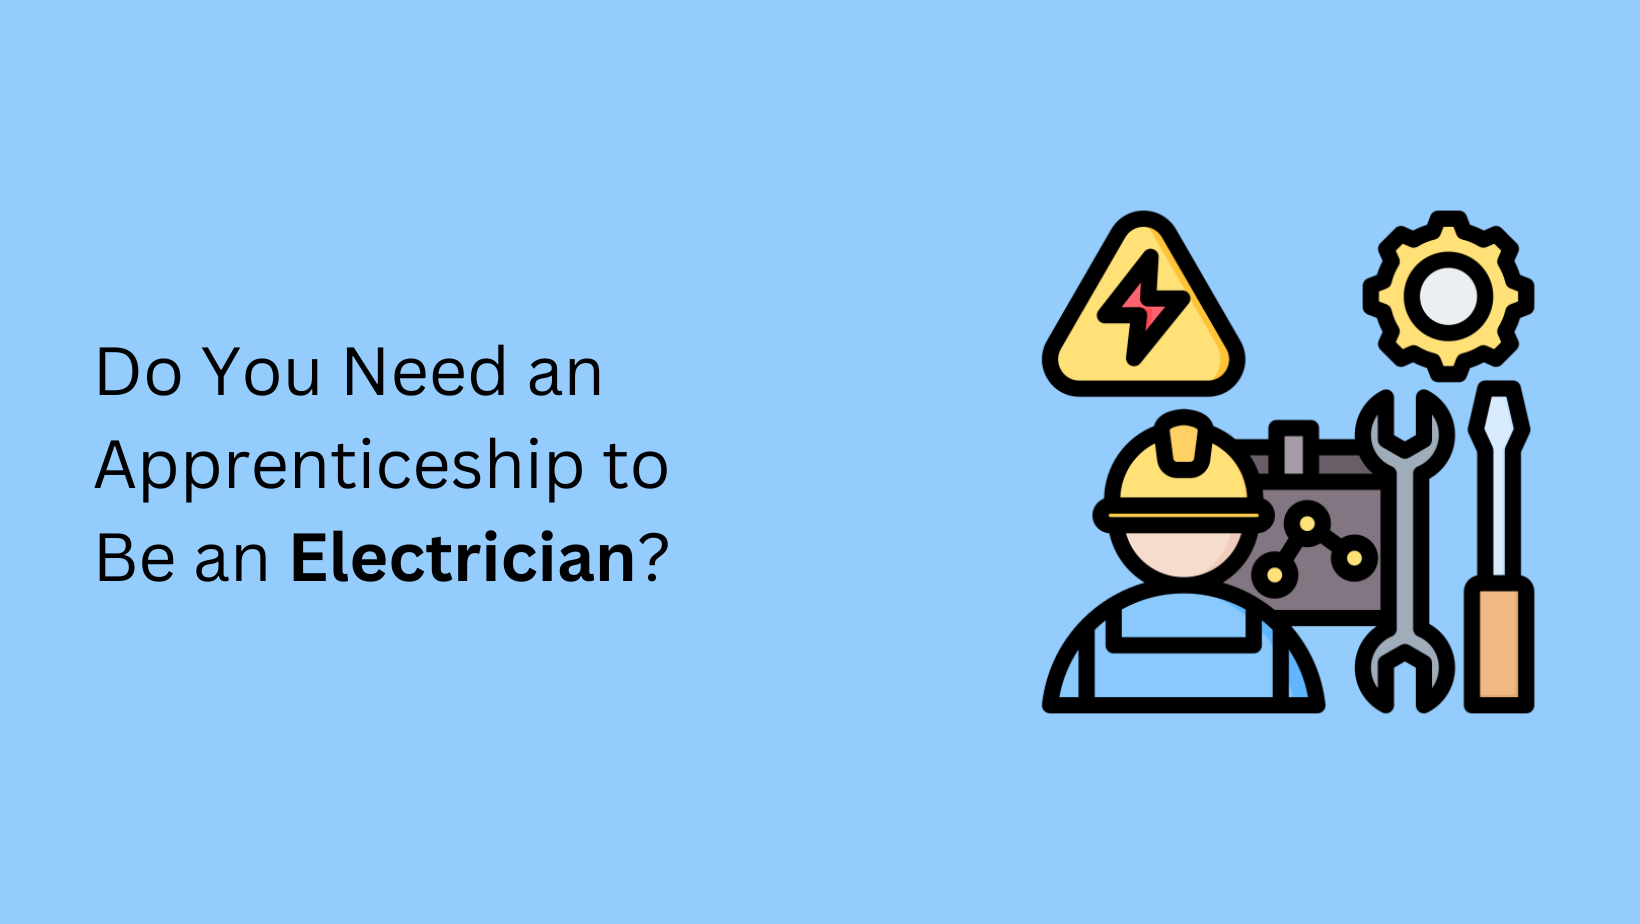 Do You Need an Apprenticeship to Be an Electrician